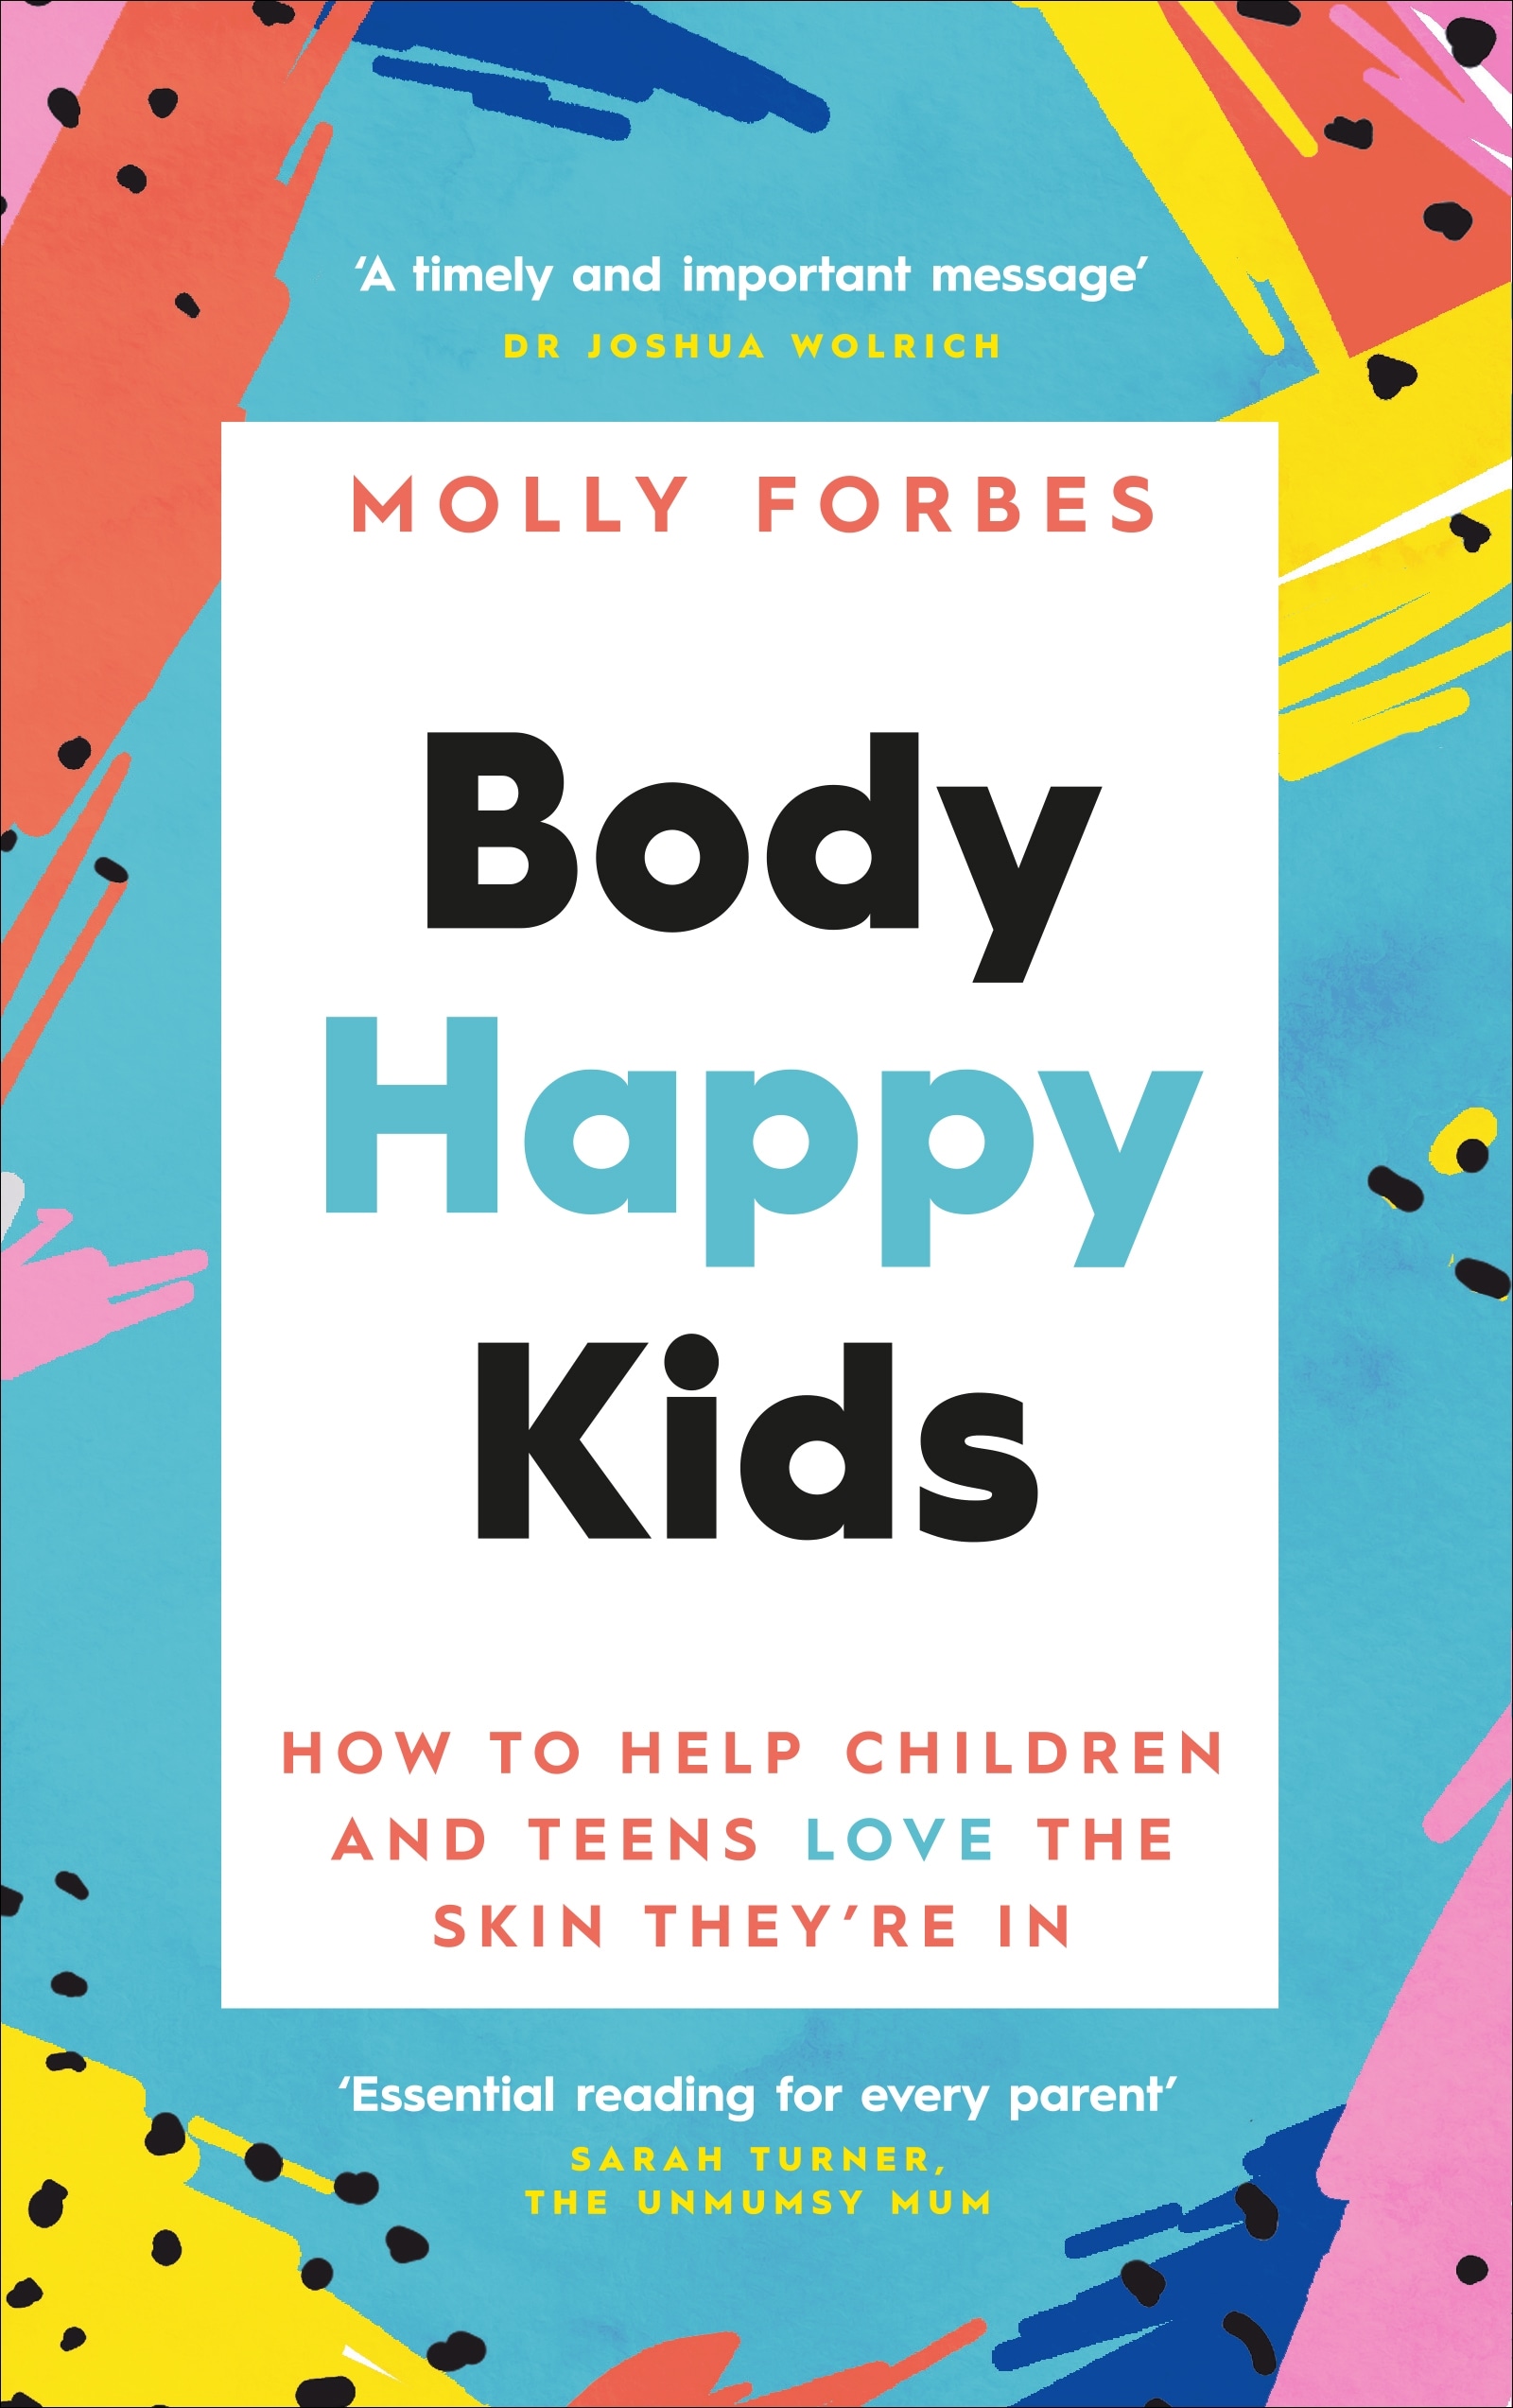 Book “Body Happy Kids” by Molly Forbes — April 1, 2021